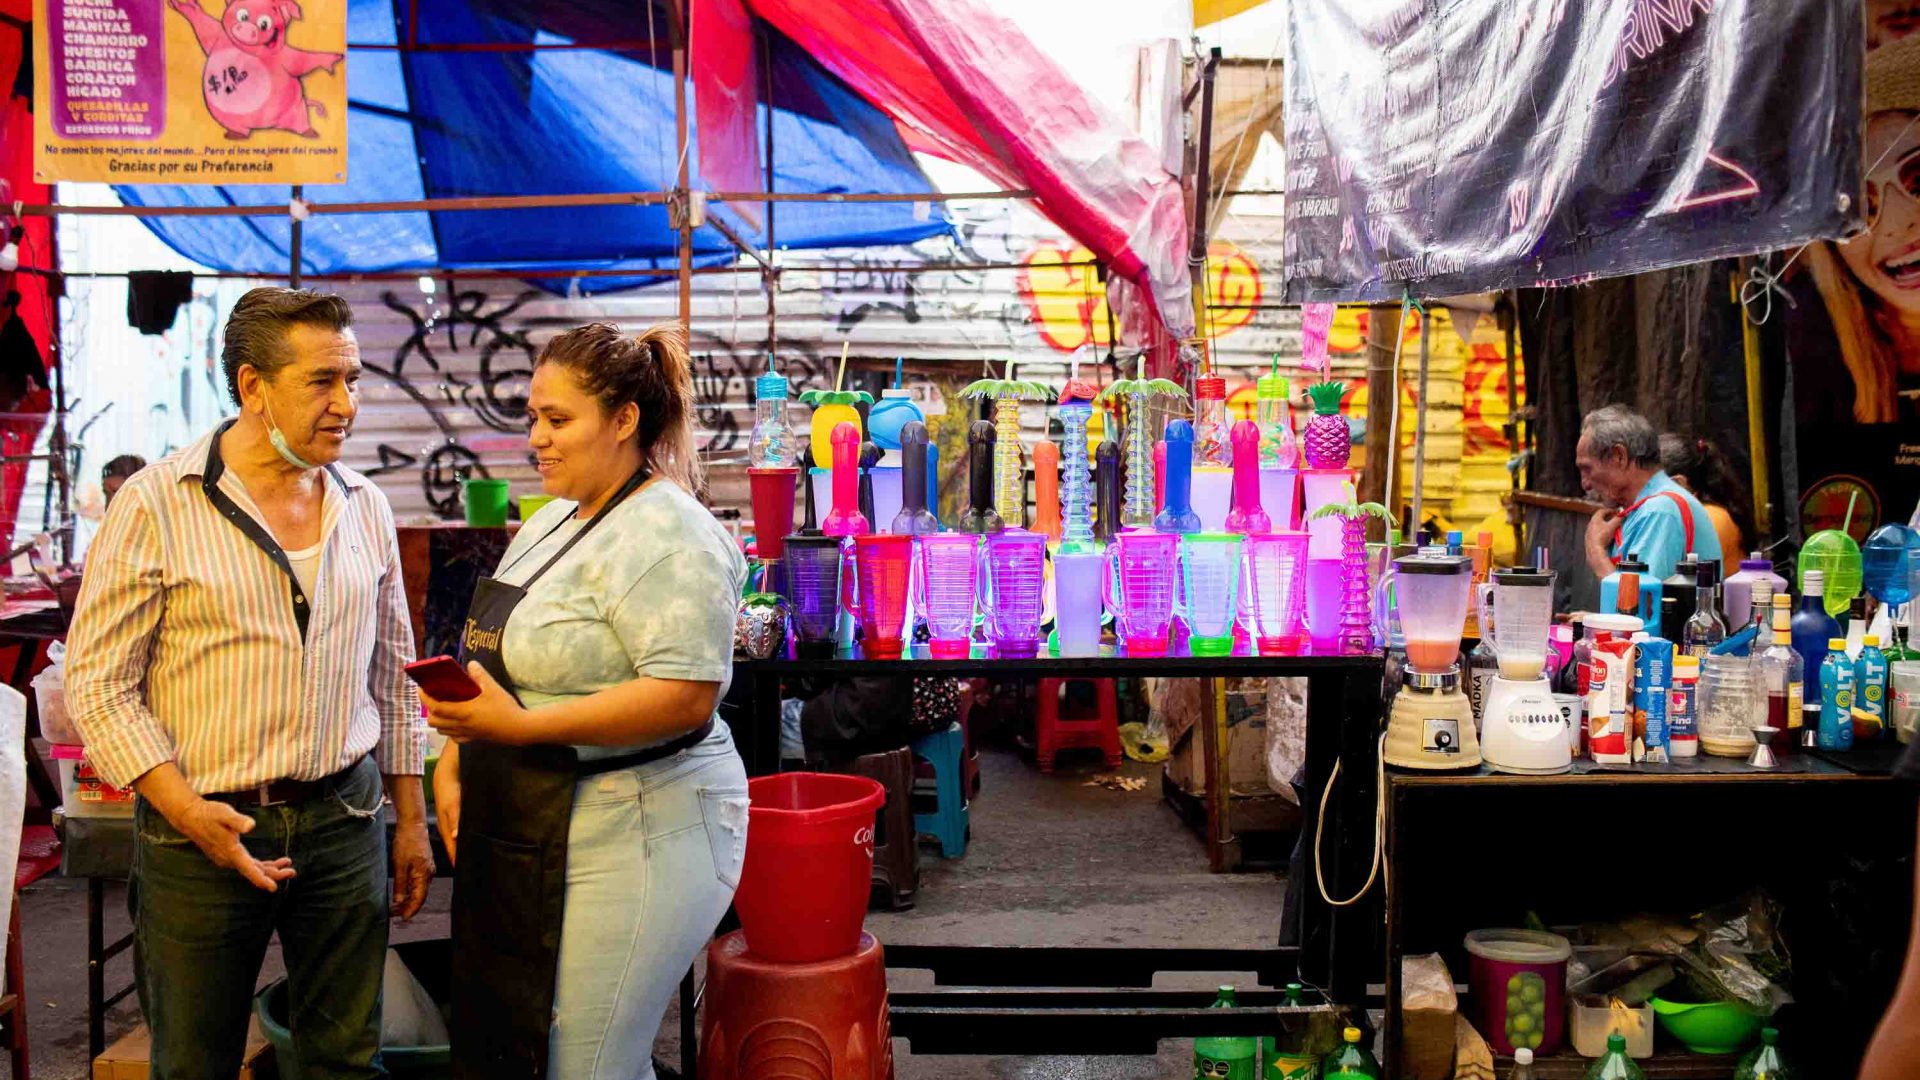 A woman and man talk in front of a michelada stand selling drinks in penis shaped cups.